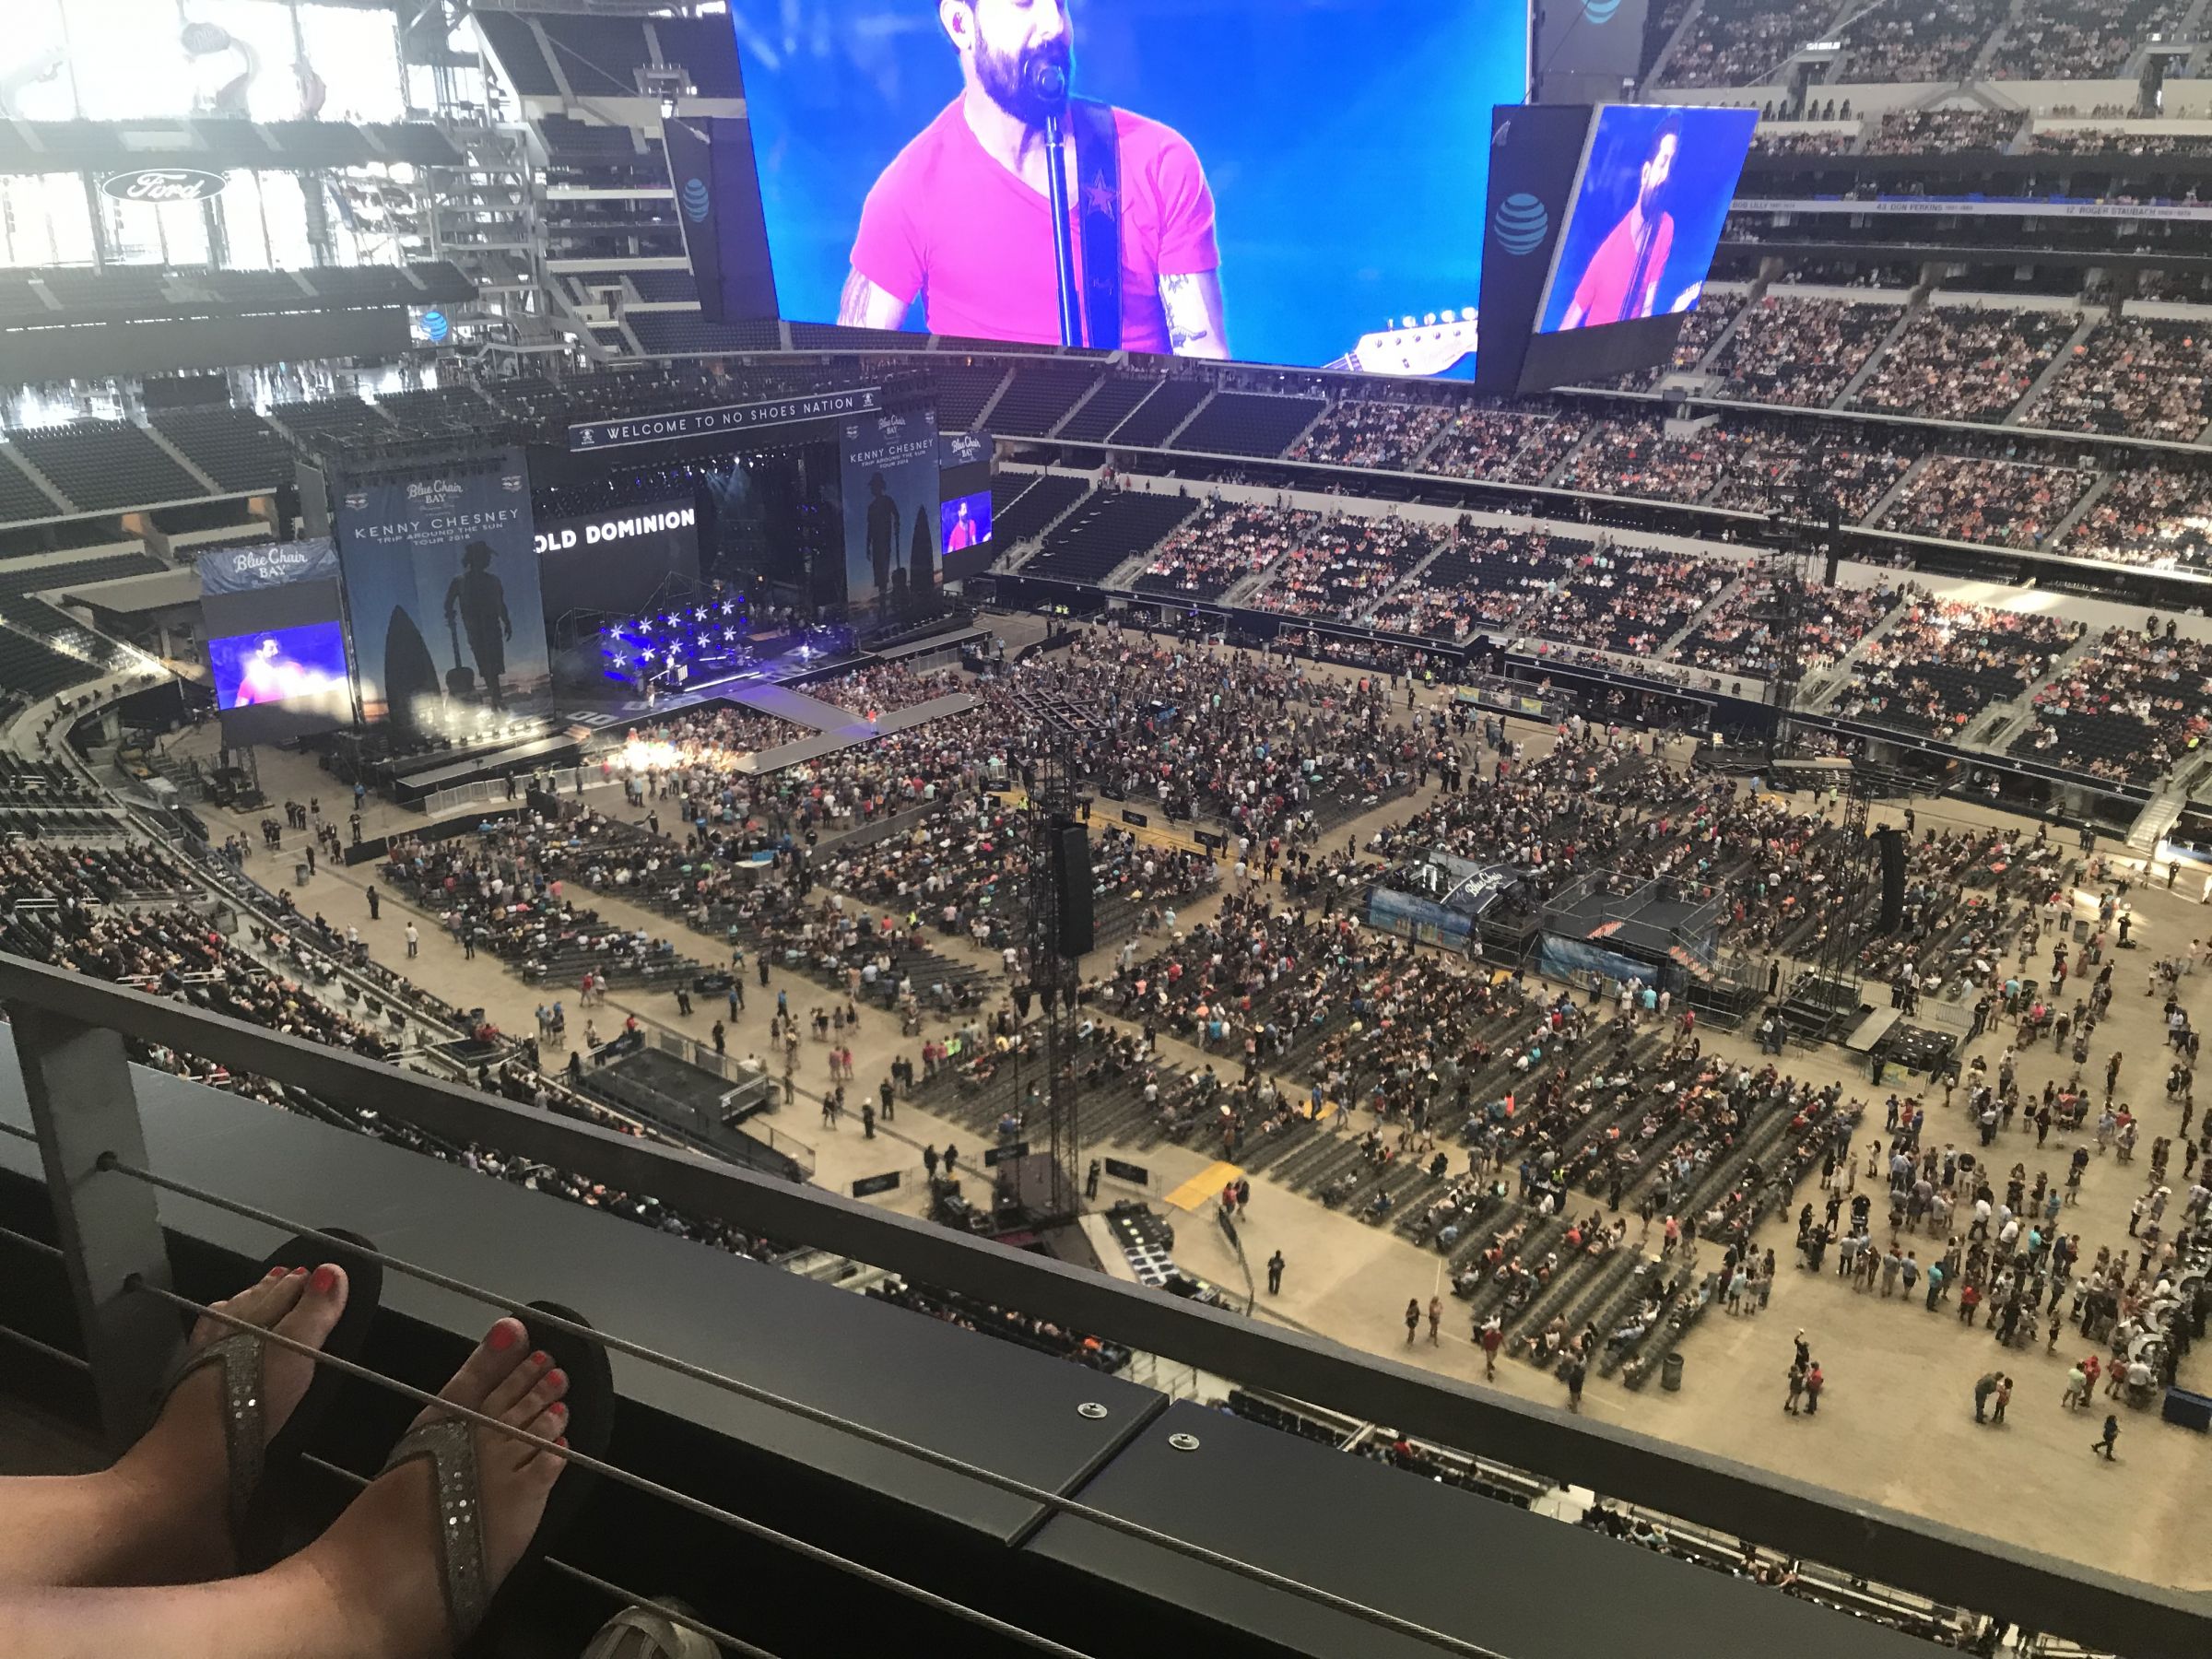 section 438, row 1 seat view  for concert - at&t stadium (cowboys stadium)